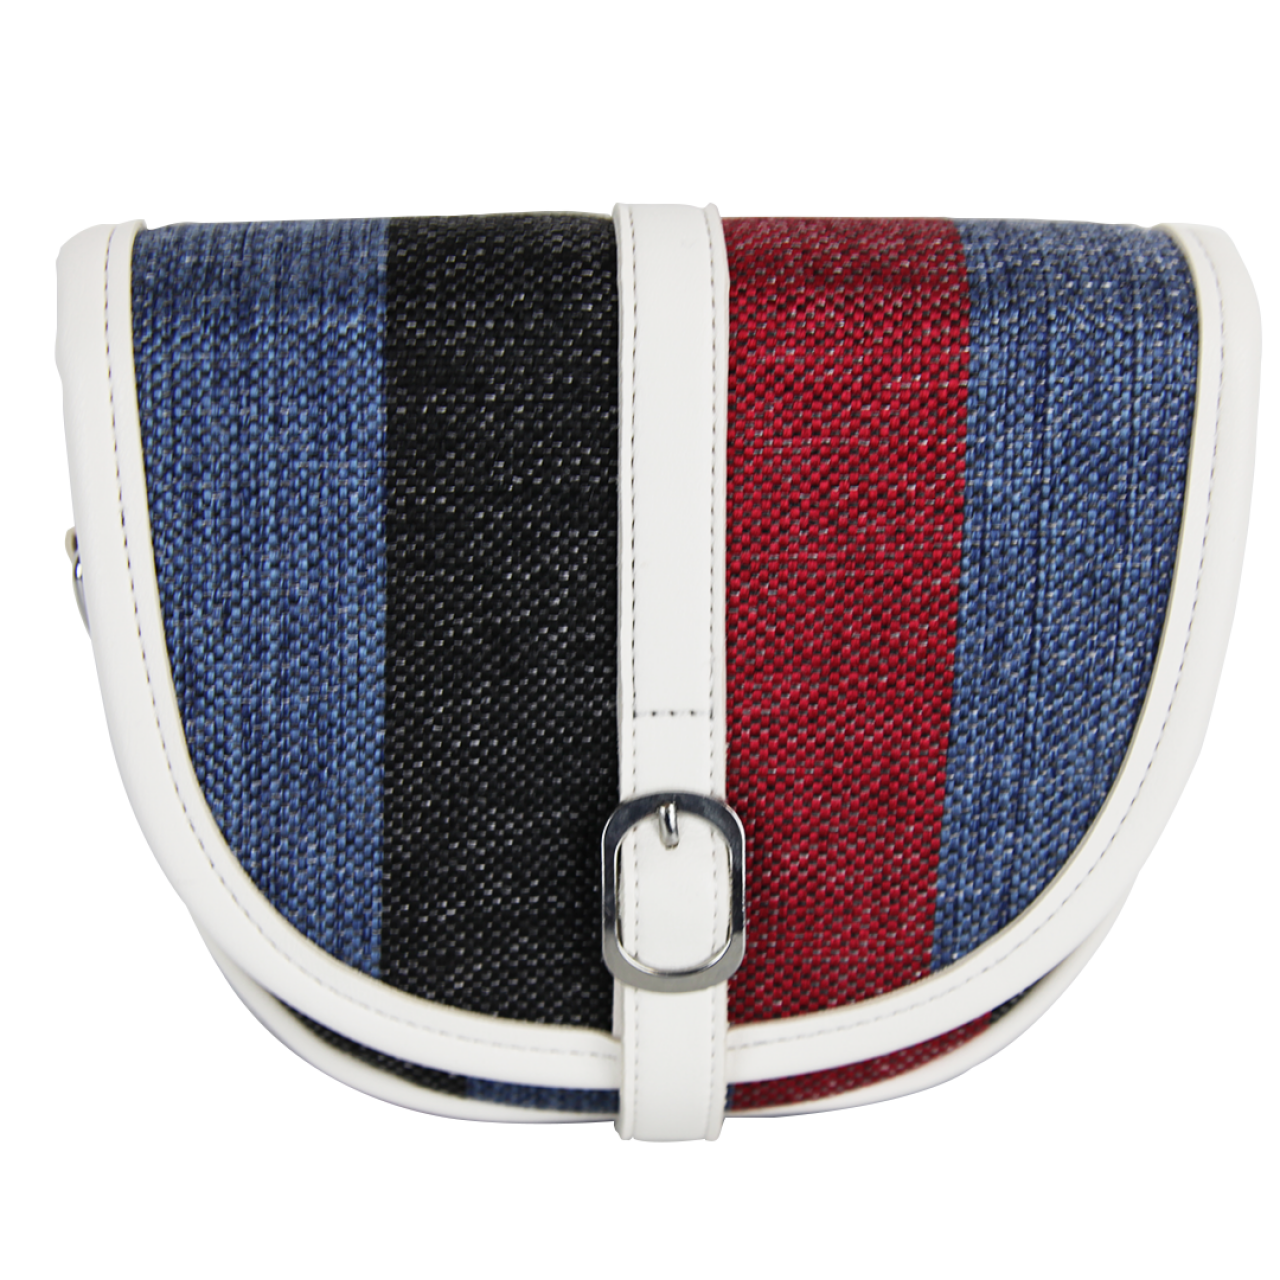 Women's Modern Stripes Classic Multicolor Crossbody Tote Bag With Adjustable White Shoulder Strap